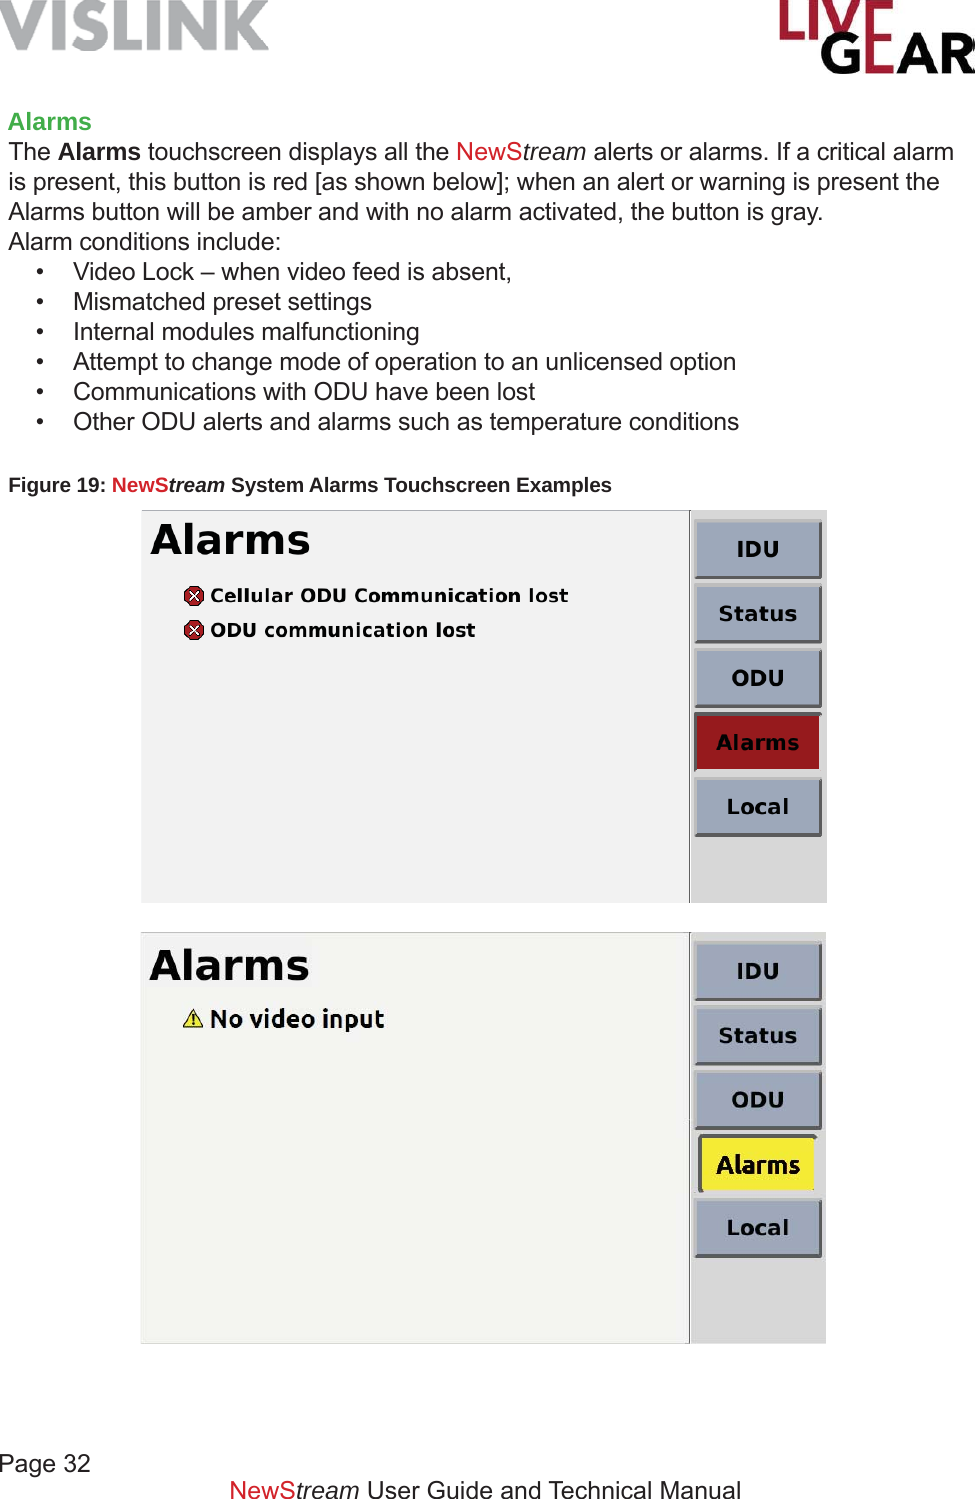 Page 32NewStream User Guide and Technical ManualAlarmsThe Alarms touchscreen displays all the NewStream alerts or alarms. If a critical alarm is present, this button is red [as shown below]; when an alert or warning is present the Alarms button will be amber and with no alarm activated, the button is gray.  Alarm conditions include:•  Video Lock – when video feed is absent,•  Mismatched preset settings•  Internal modules malfunctioning•  Attempt to change mode of operation to an unlicensed option•  Communications with ODU have been lost•  Other ODU alerts and alarms such as temperature conditionsFigure 19: NewStream System Alarms Touchscreen Examples 